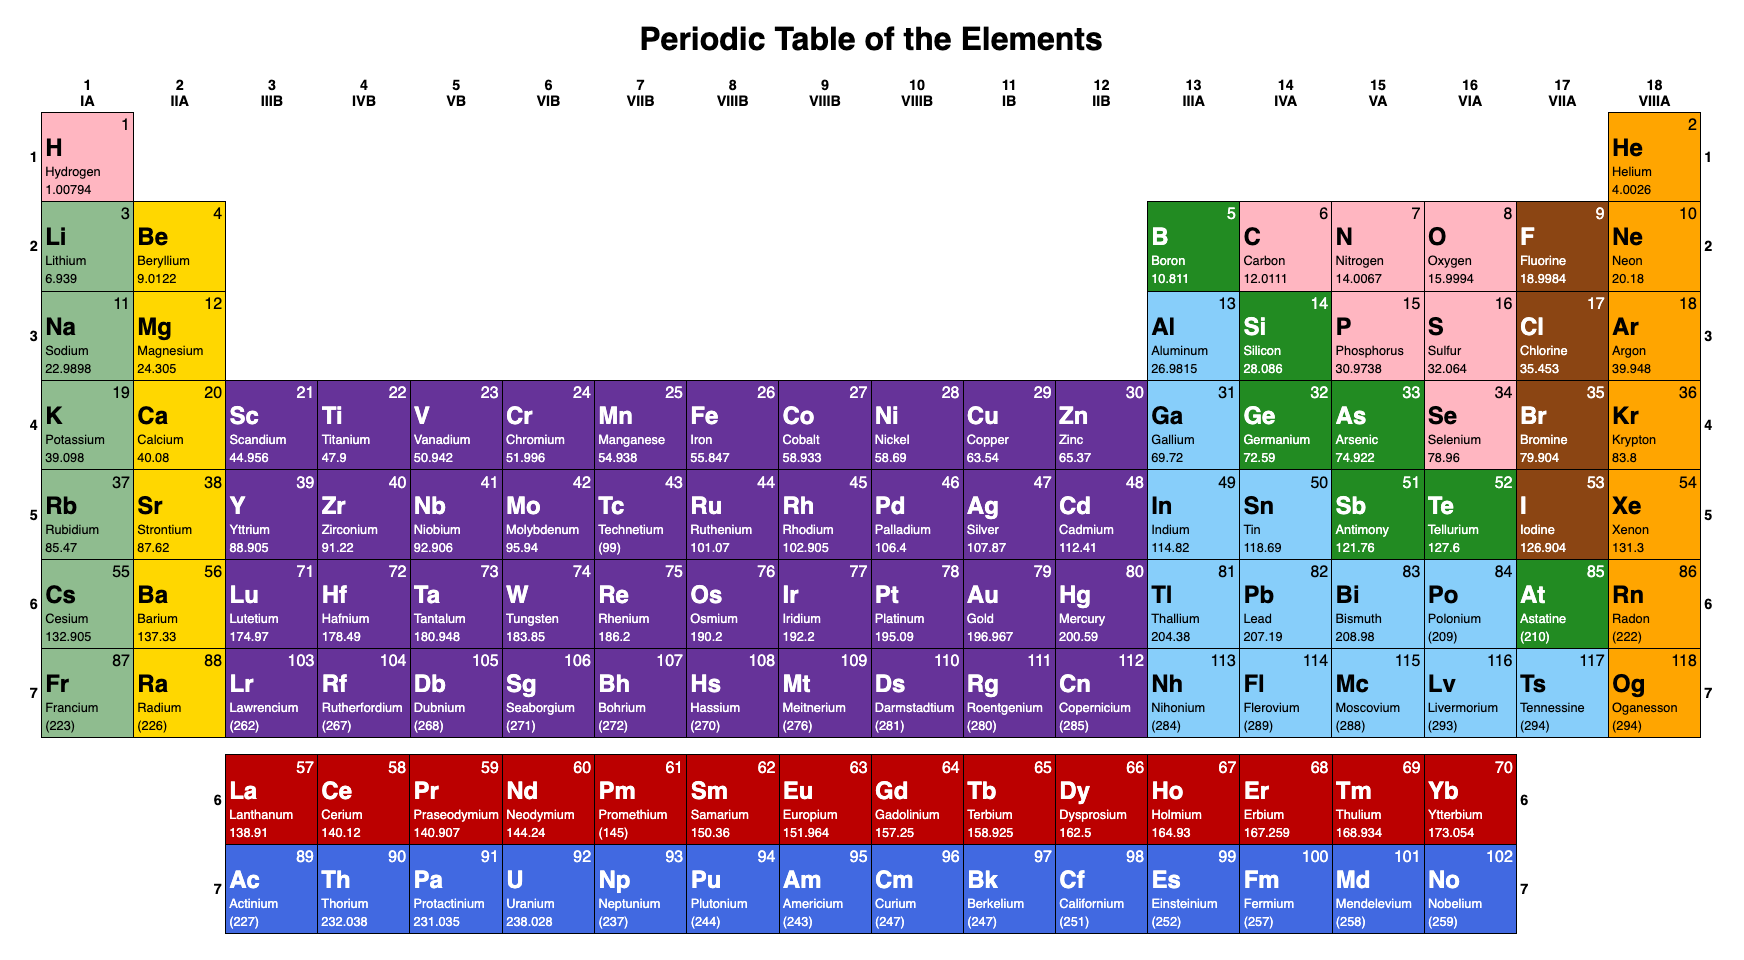 Periodic Table of the Elements (large)